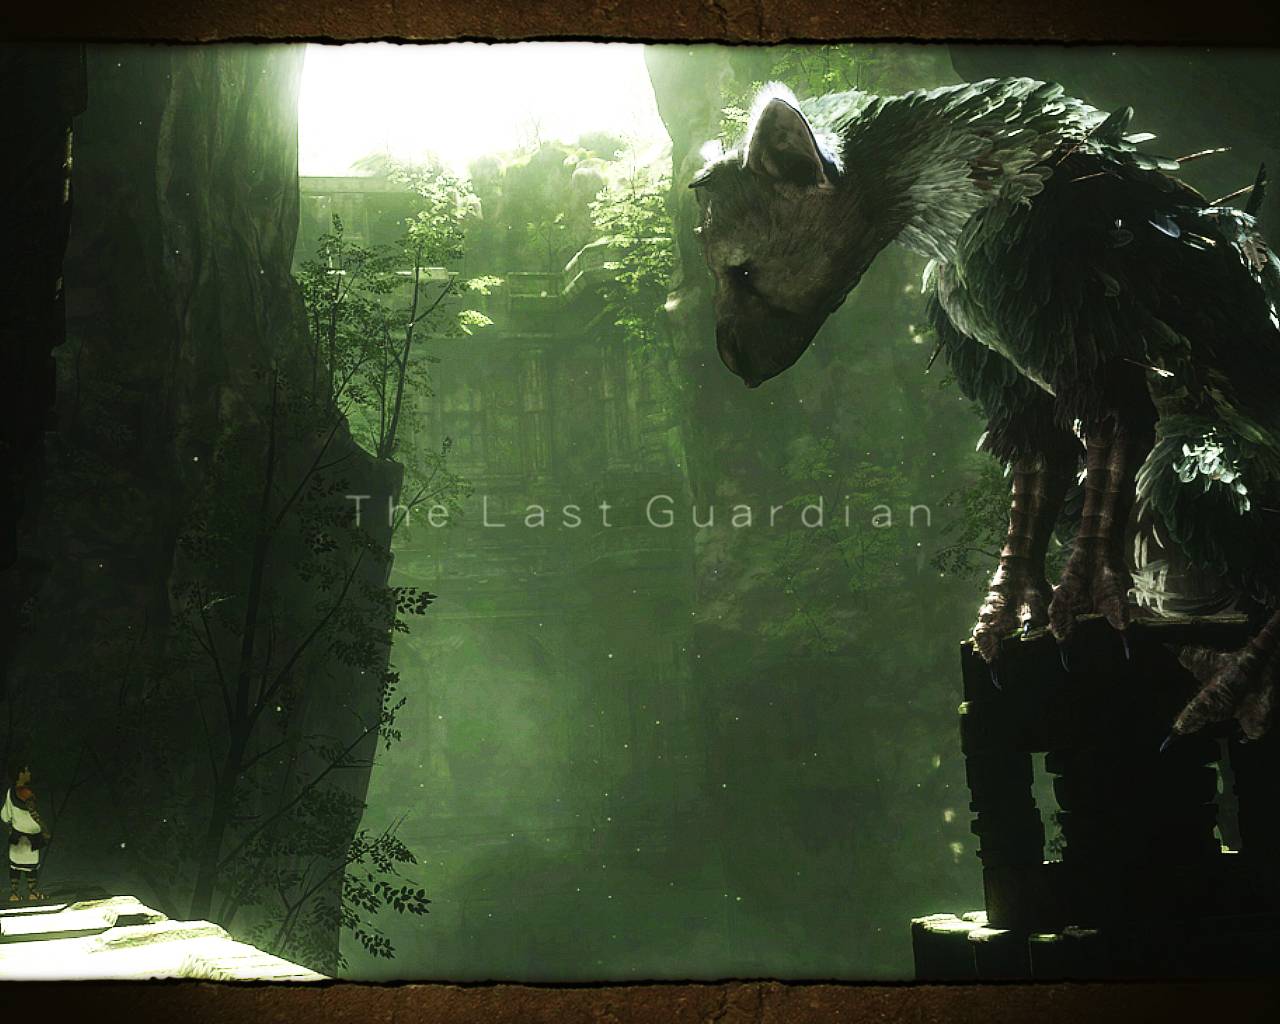 The last guardian pc background